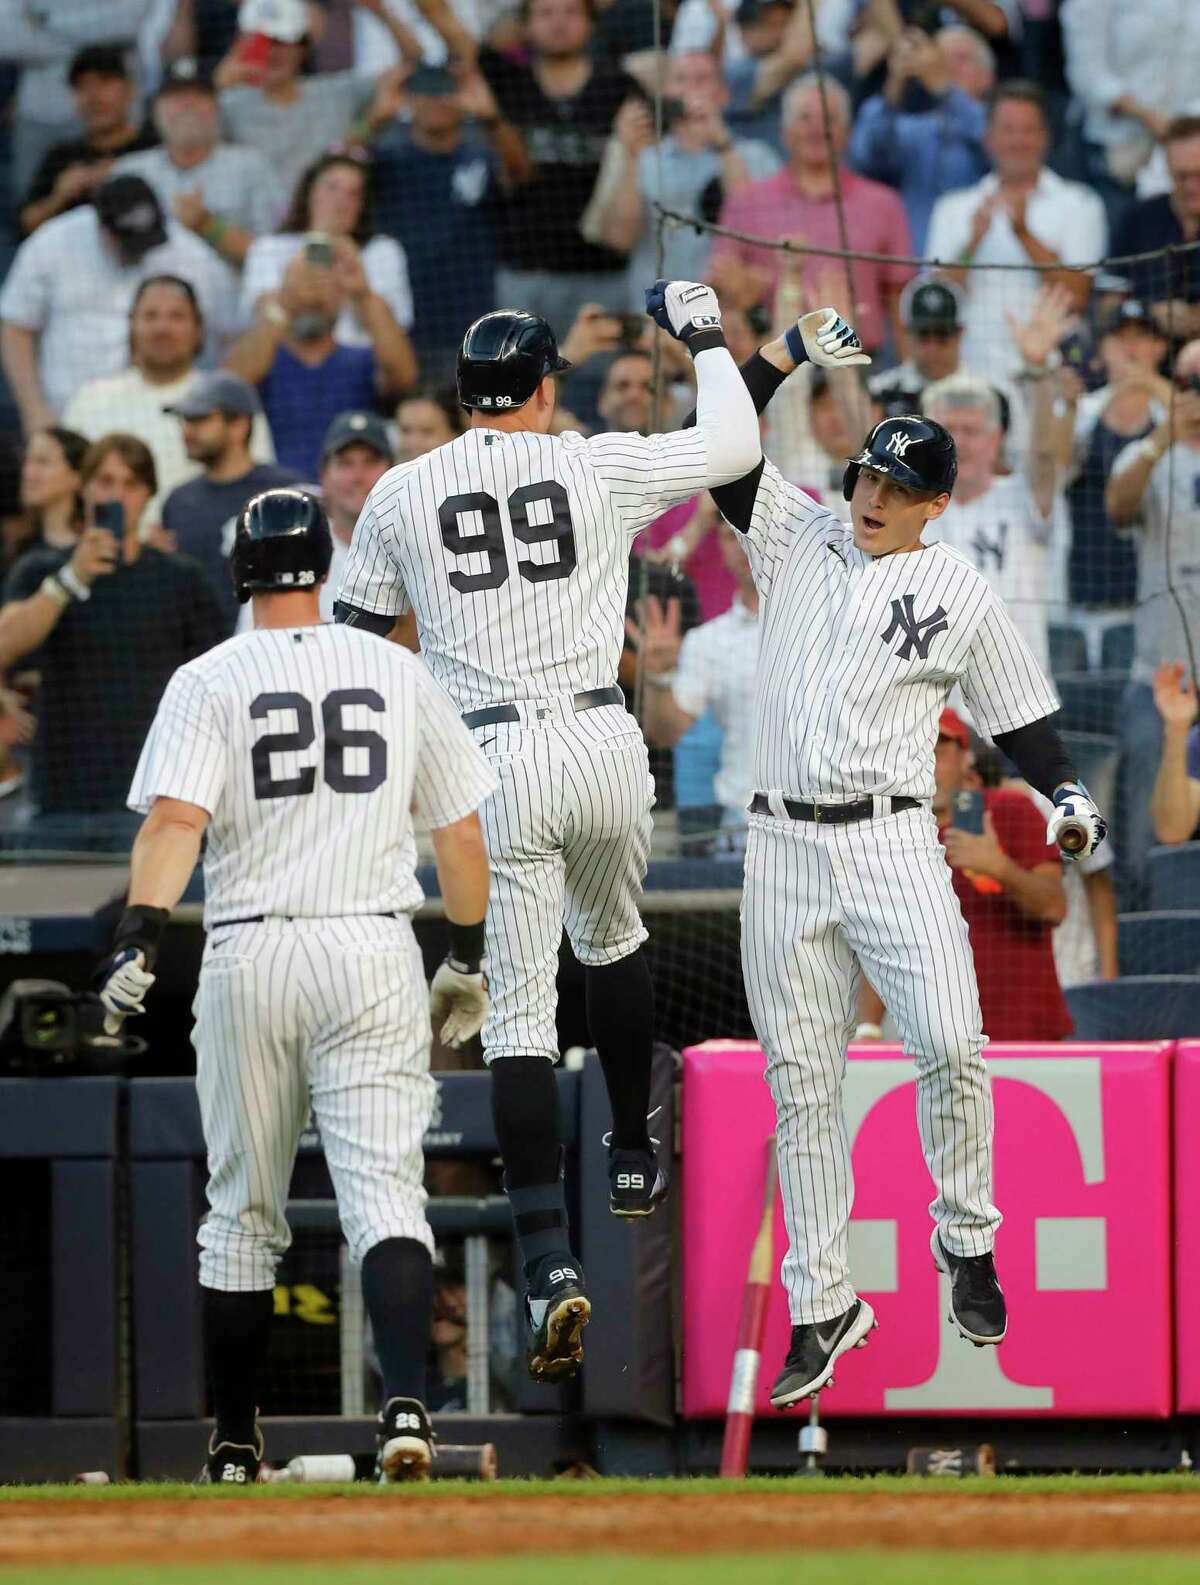 NEW YORK, NEW YORK - AUGUST 01: Aaron Judge #99 of the New York Yankees celebrates his second inning two run home run against the Seattle Mariners with teammates Anthony Rizzo #48 and DJ LeMahieu #26 at Yankee Stadium on August 01, 2022 in New York City. (Photo by Jim McIsaac/Getty Images)